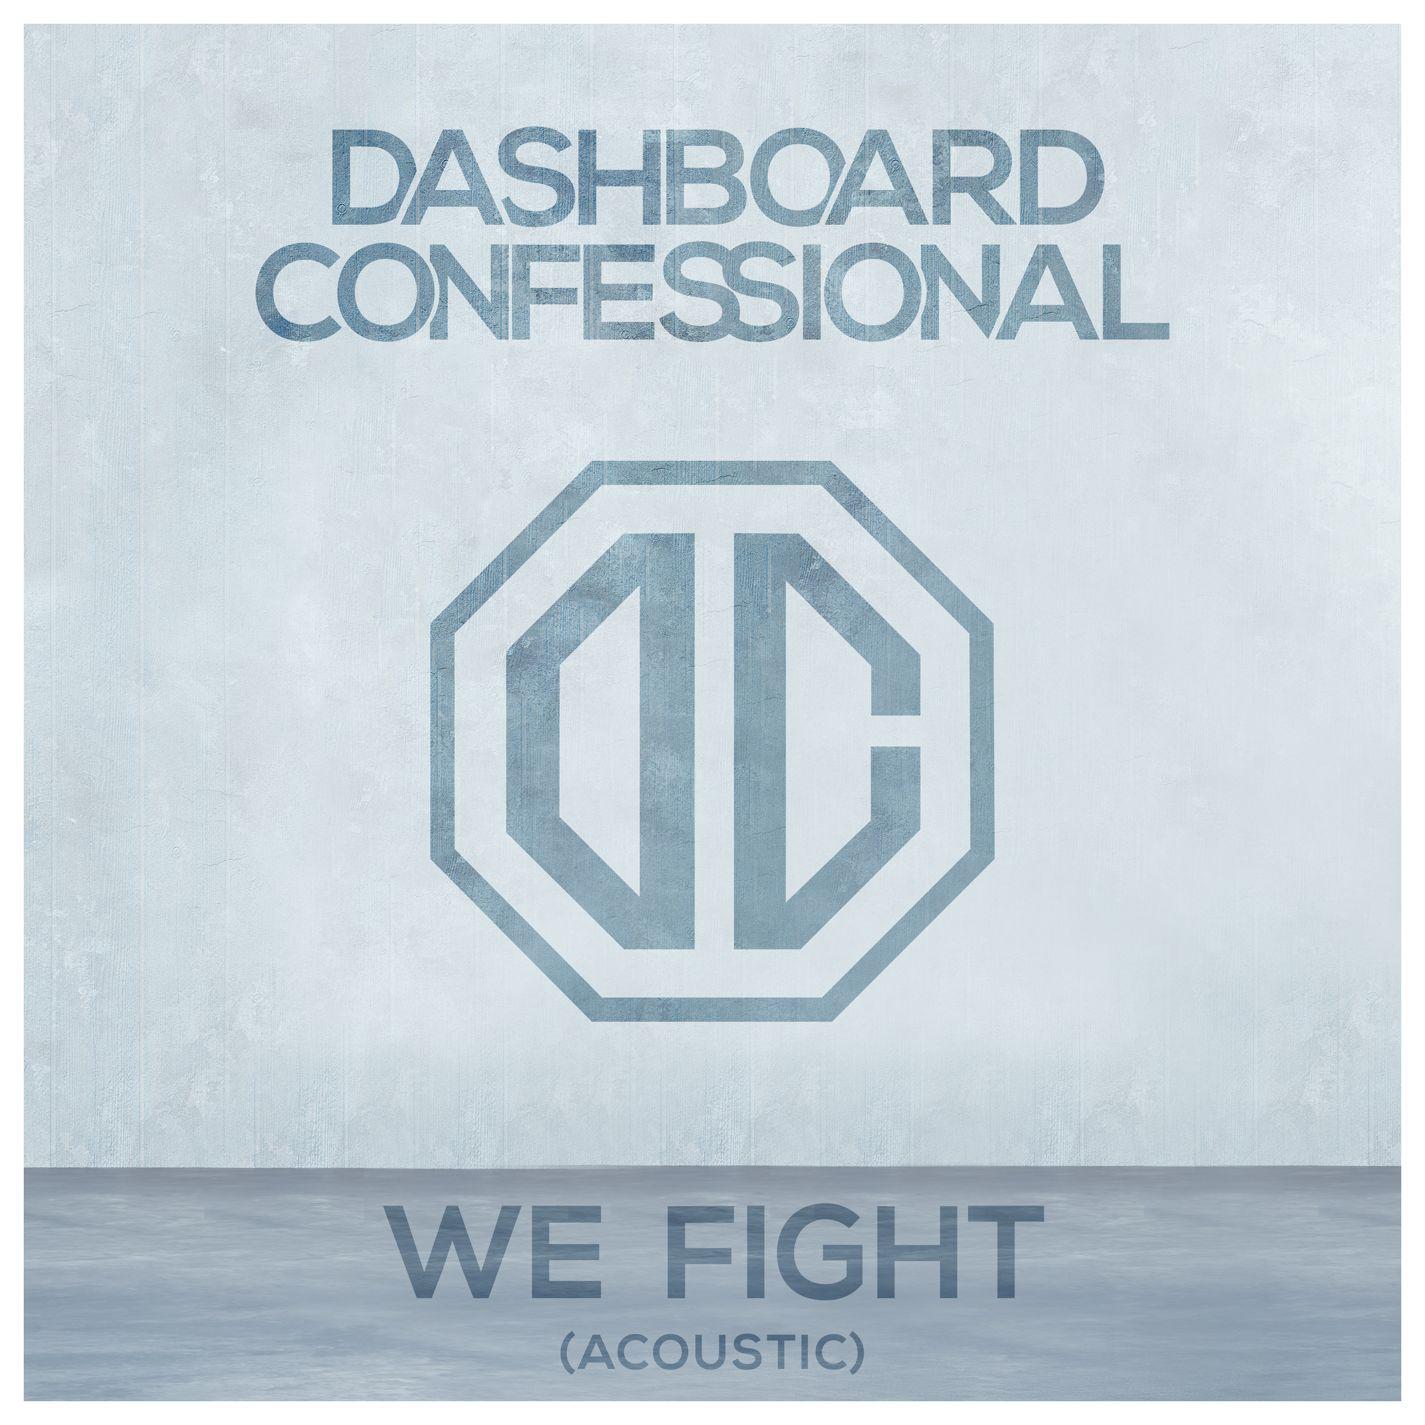 We Fight (Acoustic)专辑